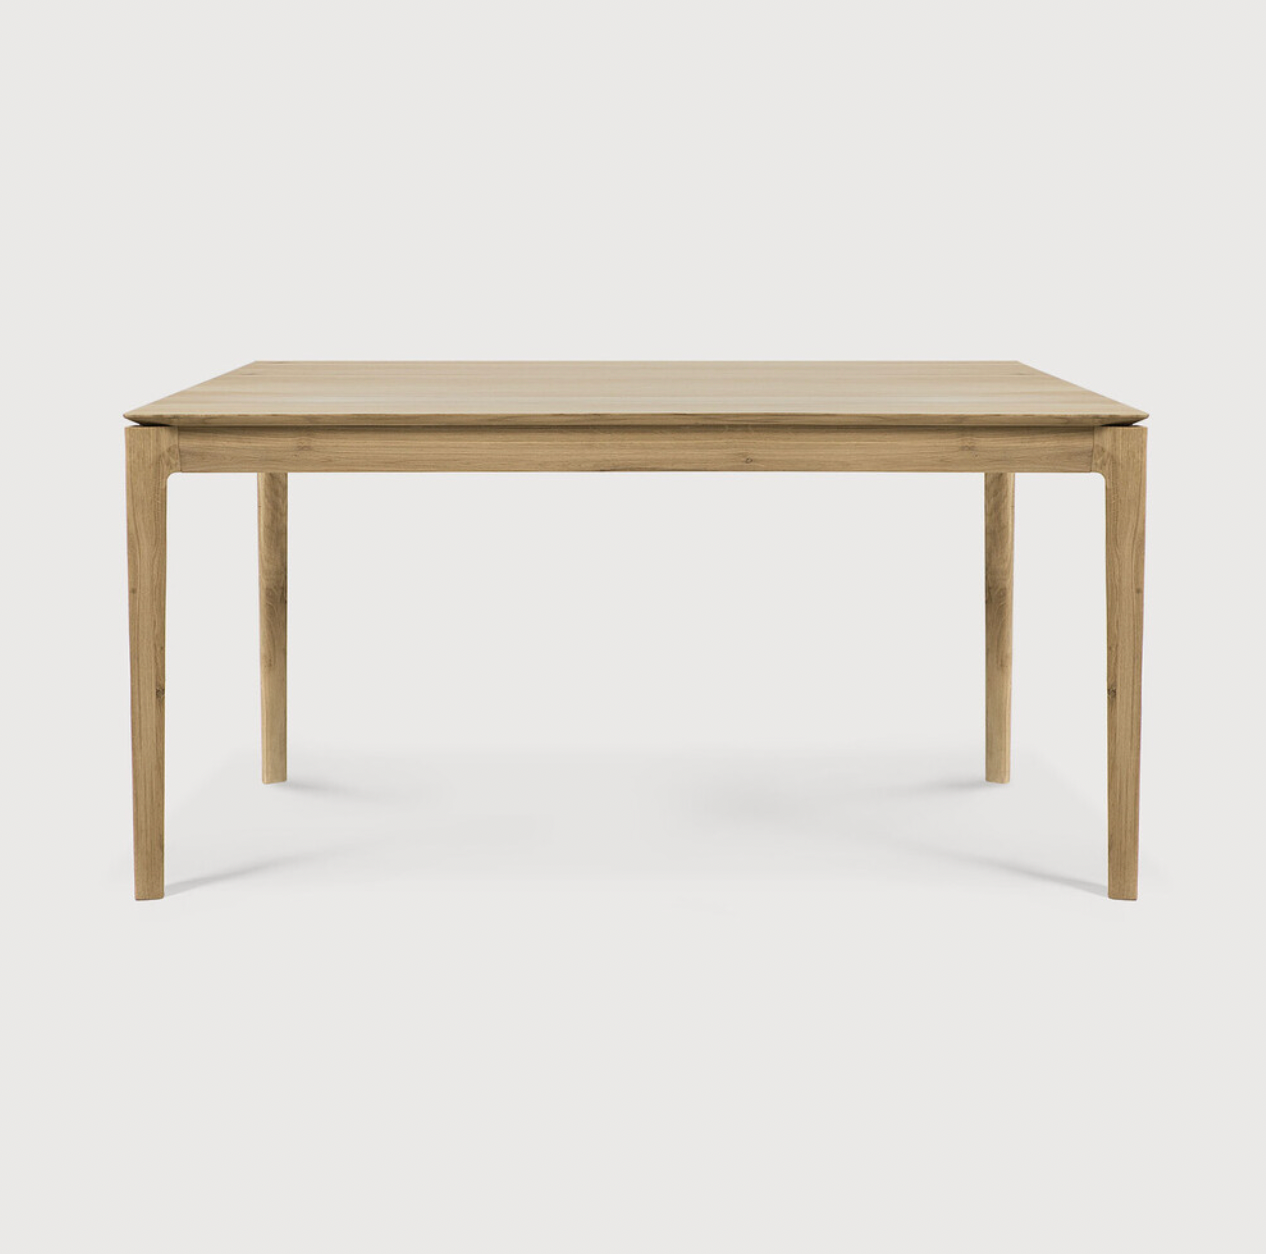 The airy shape yet rock solid construction make this Oak Bok Dining Table a timeless and remarkable design to enjoy for years to come. Available in many sizes, this can fit any dining room or kitchen area.   Material: Oak, 100% Solid Wood Finish: Oiled